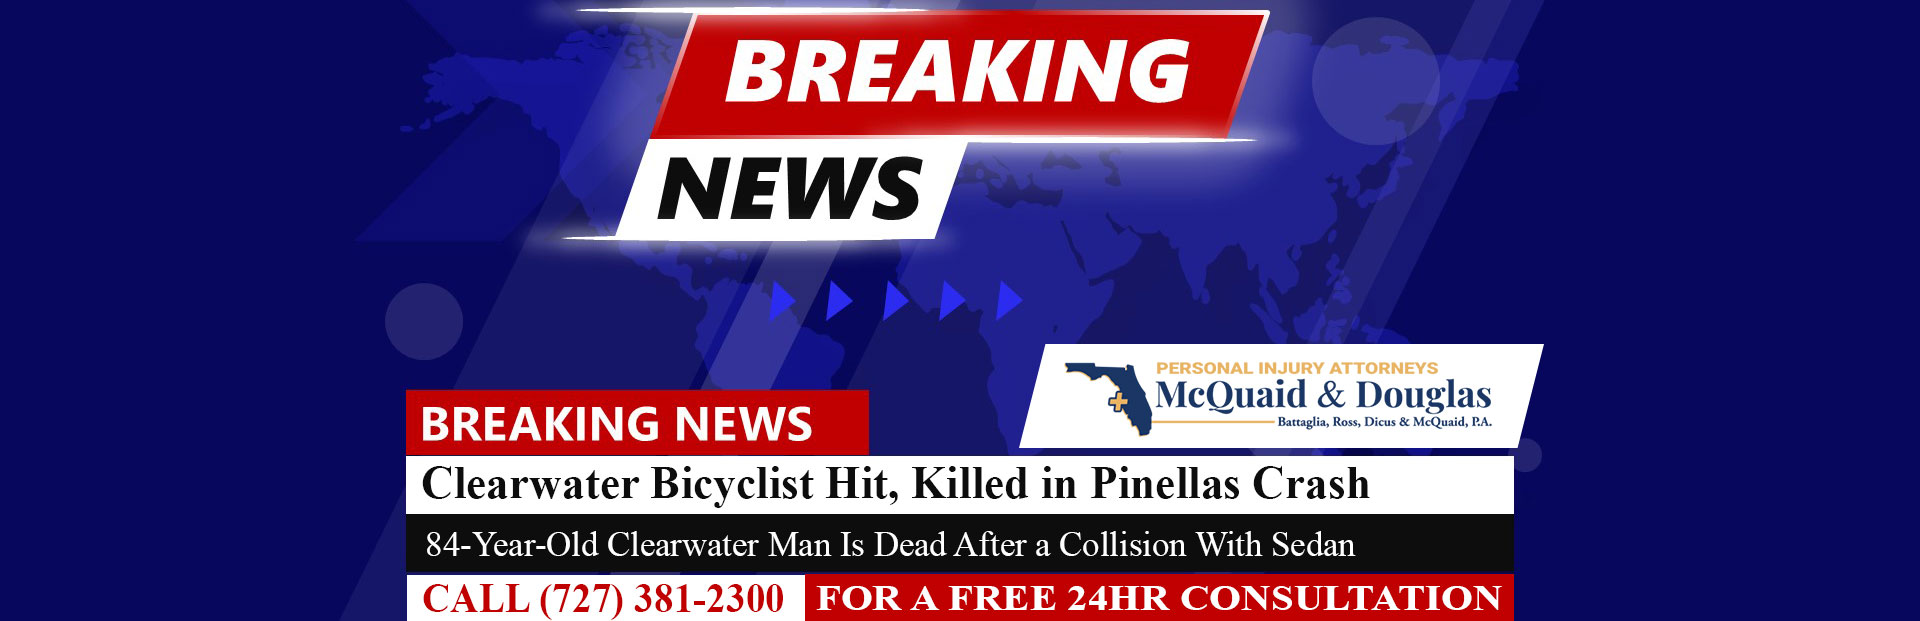 [7-19-22] Clearwater Bicyclist Hit, Killed in Pinellas Crash, Troopers Say